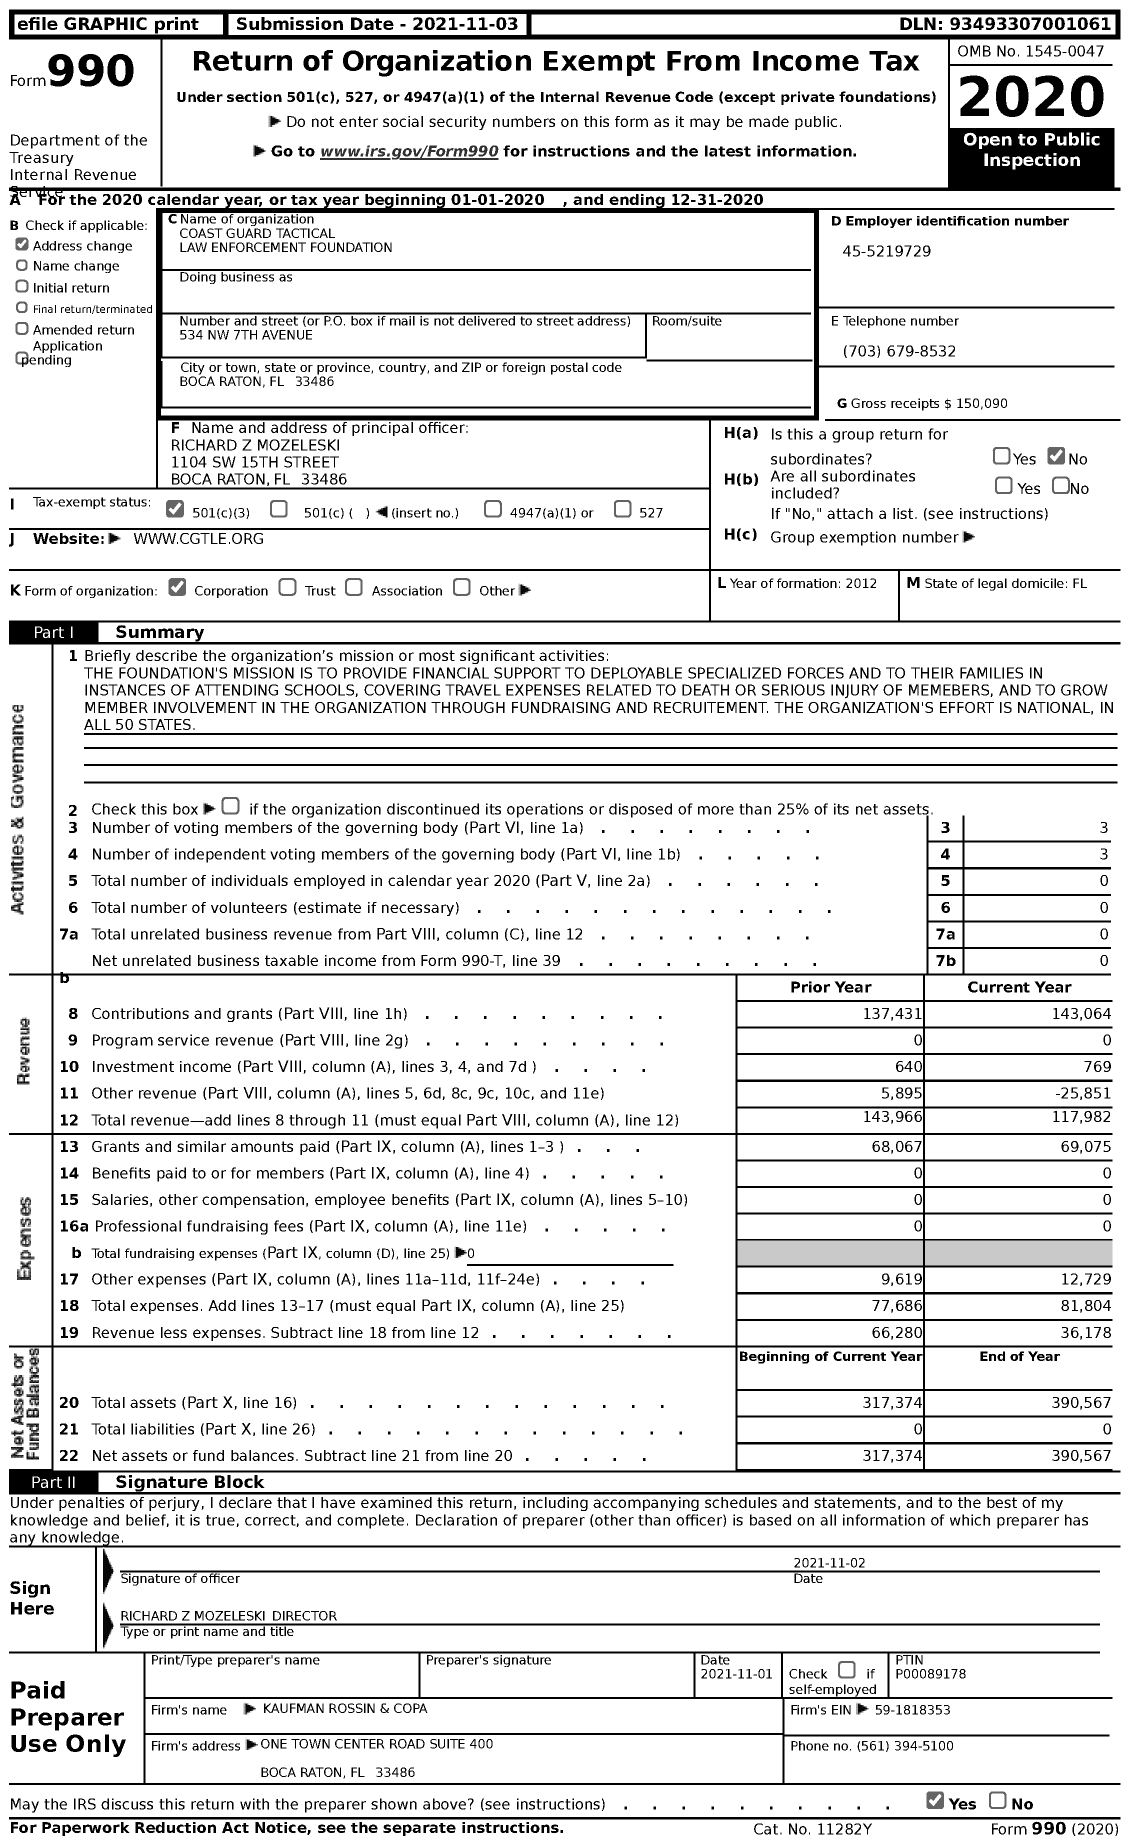 Image of first page of 2020 Form 990 for Coast Guard Tactical Law Enforcement Foundation